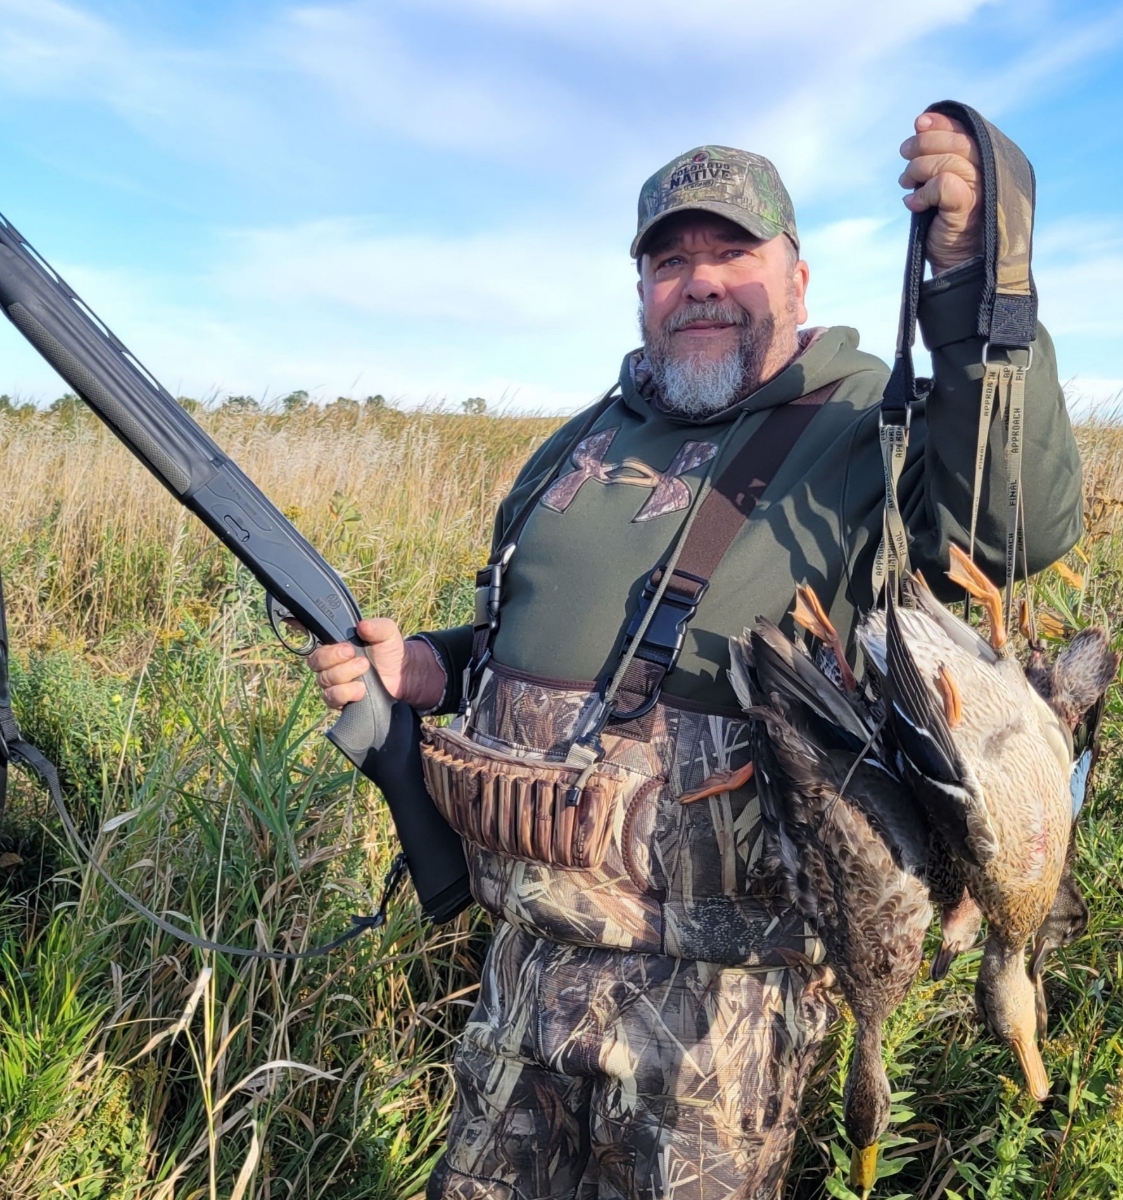 private land hunter with teal